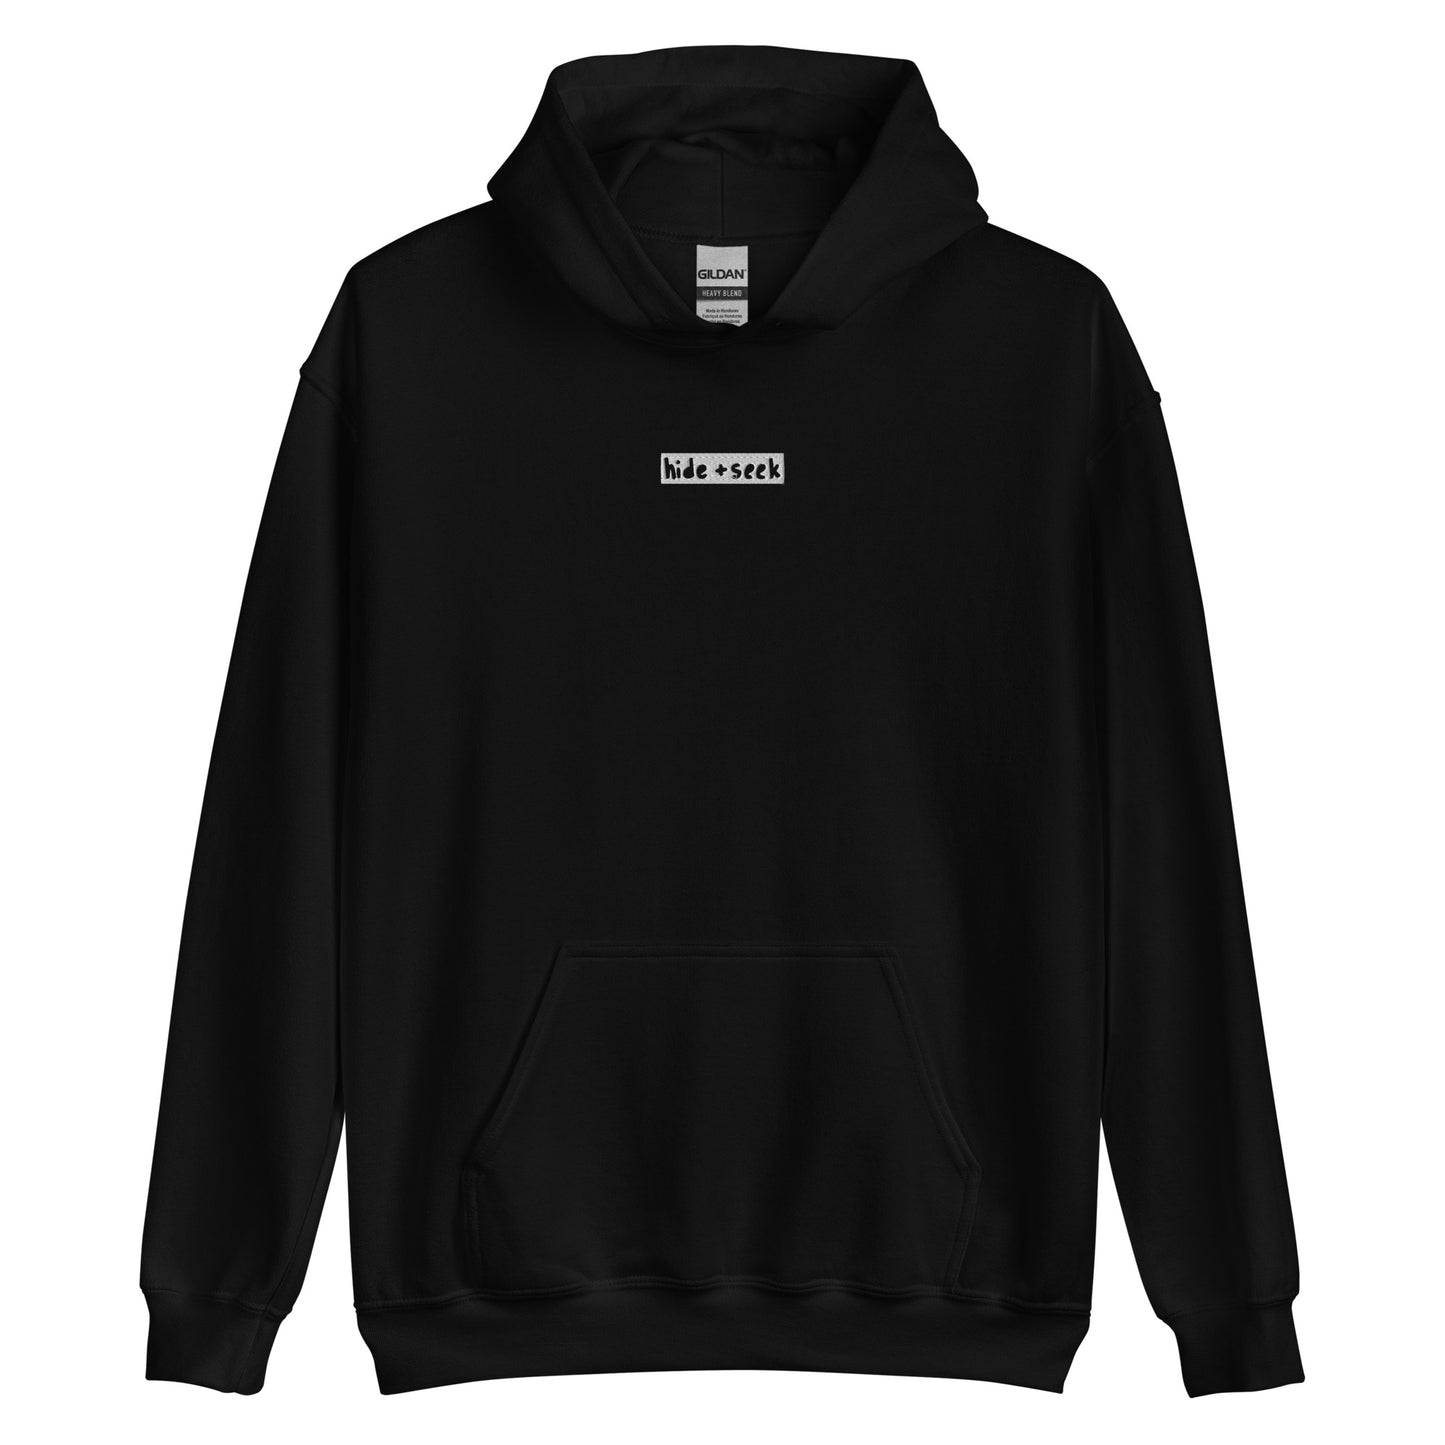 H+S x Jeerg = Embroidered Hoodie